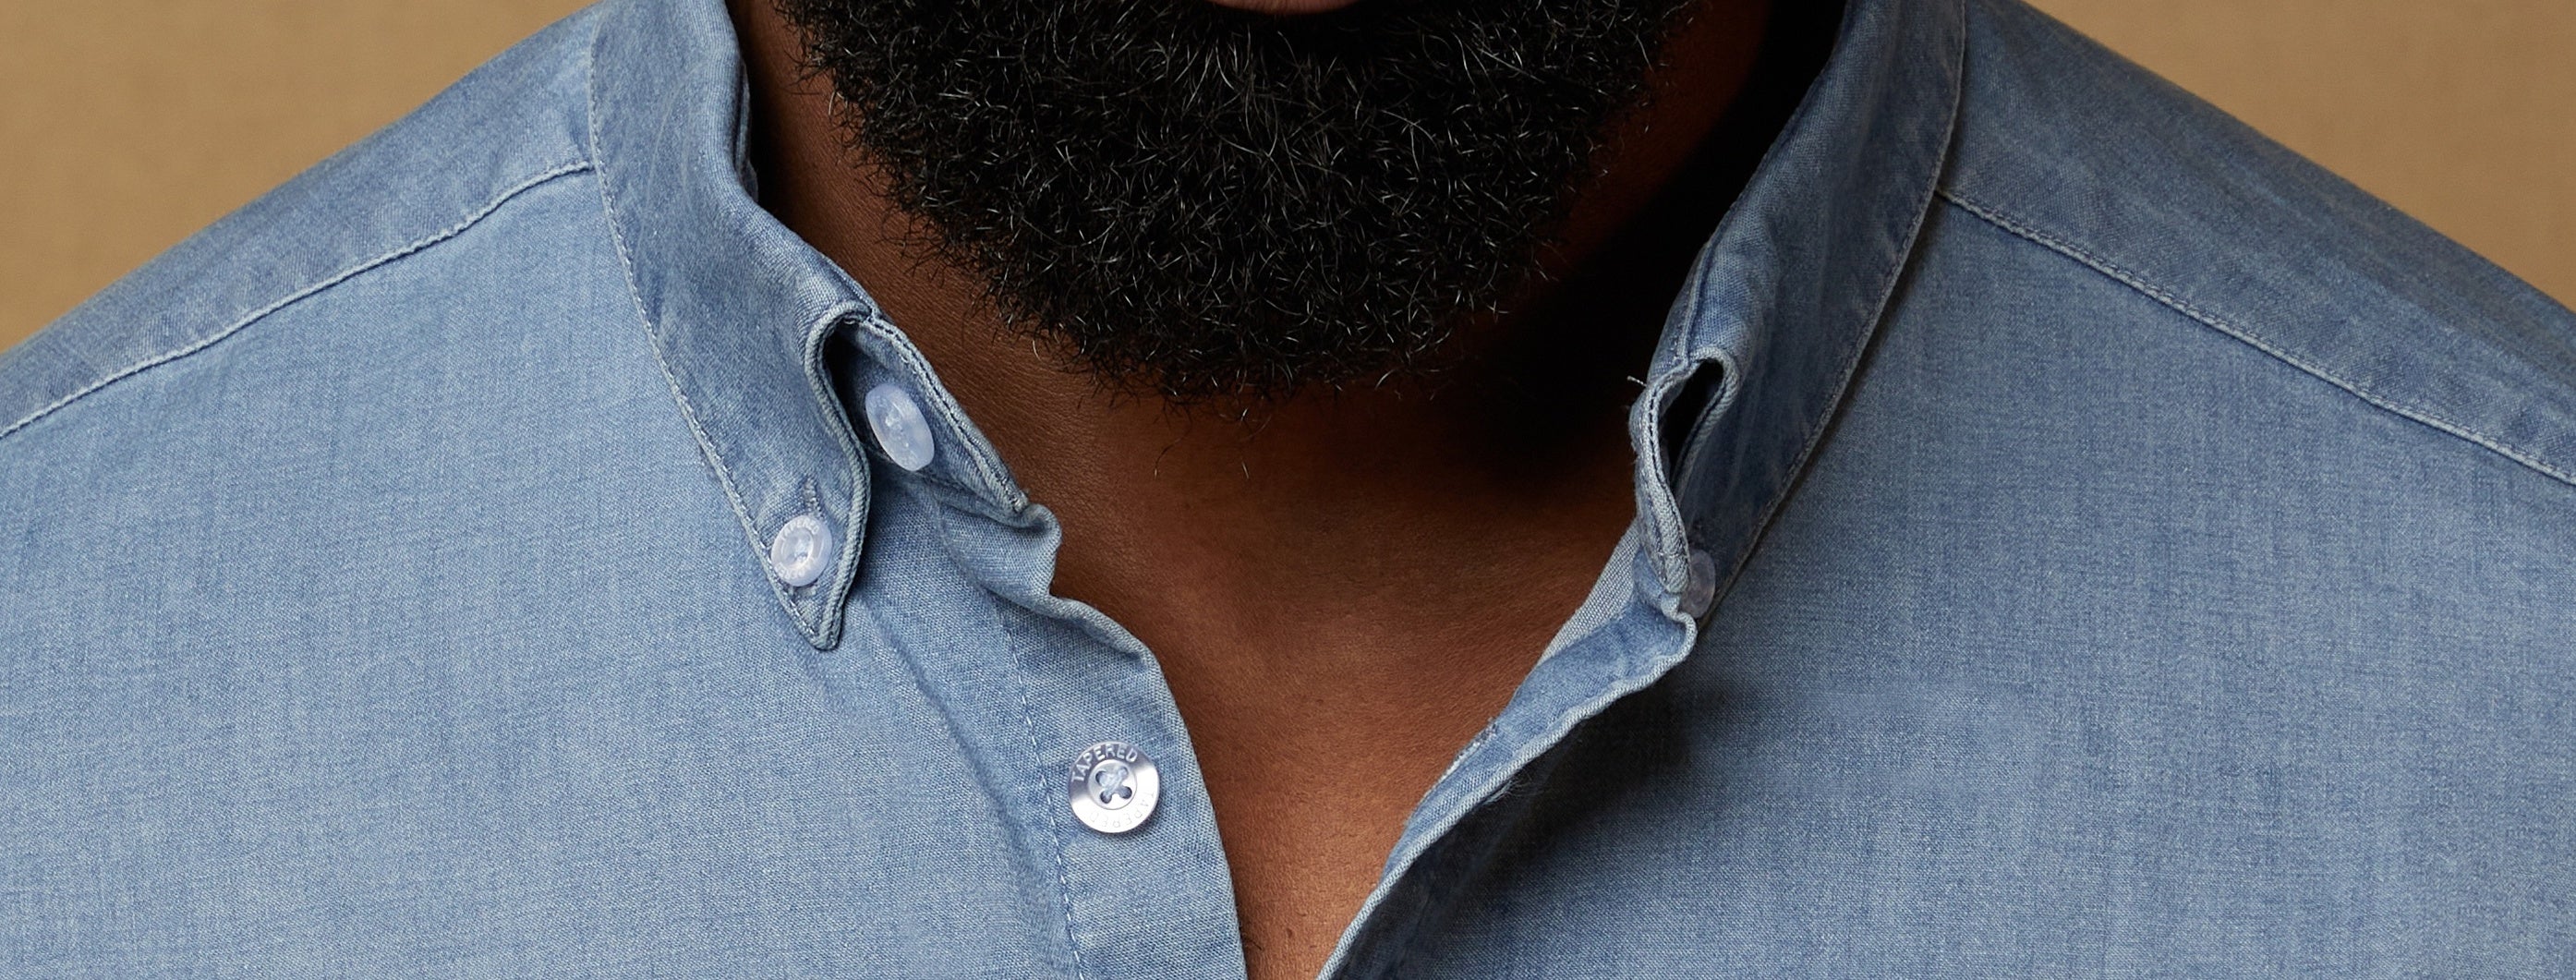 Button Up vs. Button Down: What's the Difference and When to Wear Each -  Hockerty